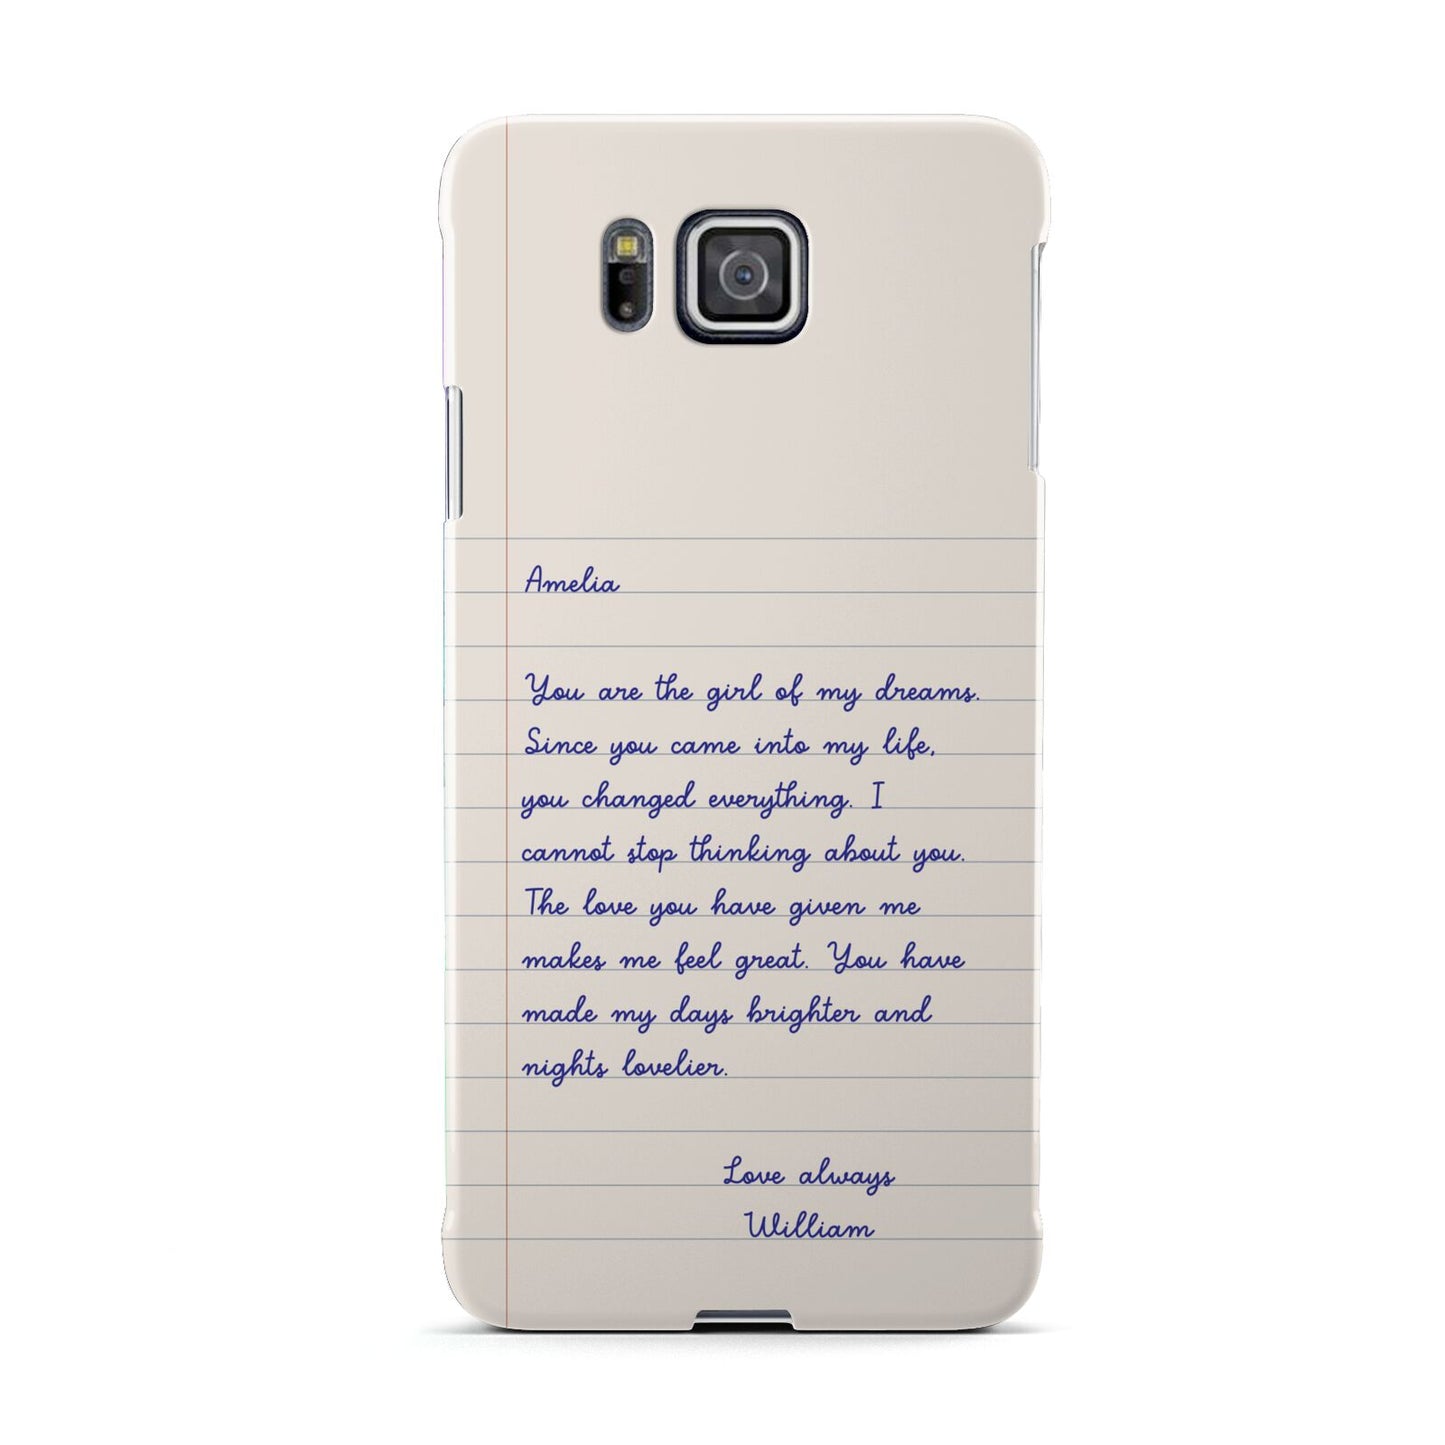 Personalised Love Letter Samsung Galaxy Alpha Case